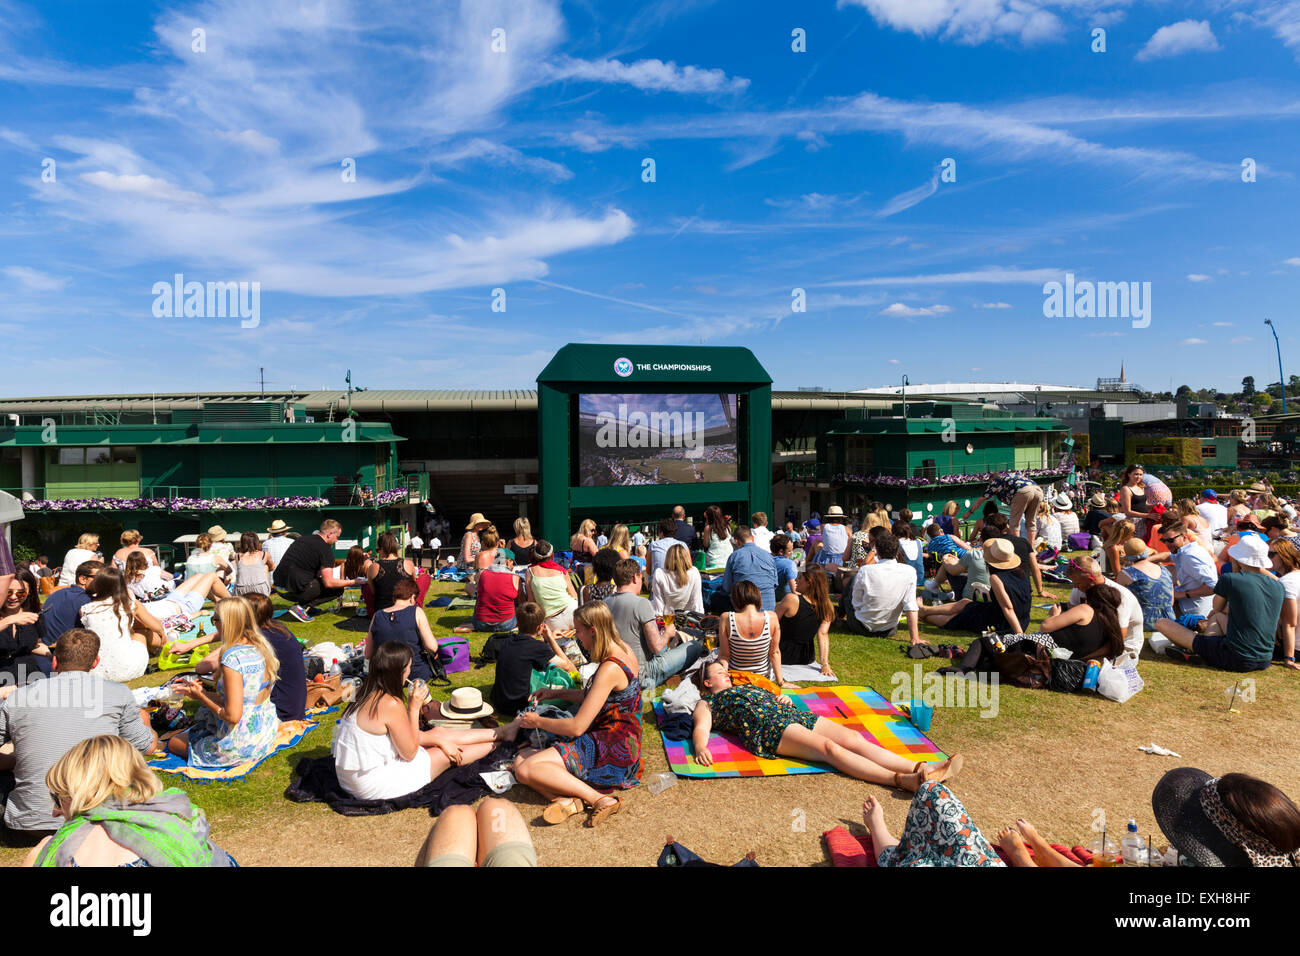 Spectators watch a tennis match on screens from the Hill at Aorangi Terrace, also known as Henman Hill or Murray Mount, during Wimbledon 2015 Stock Photo